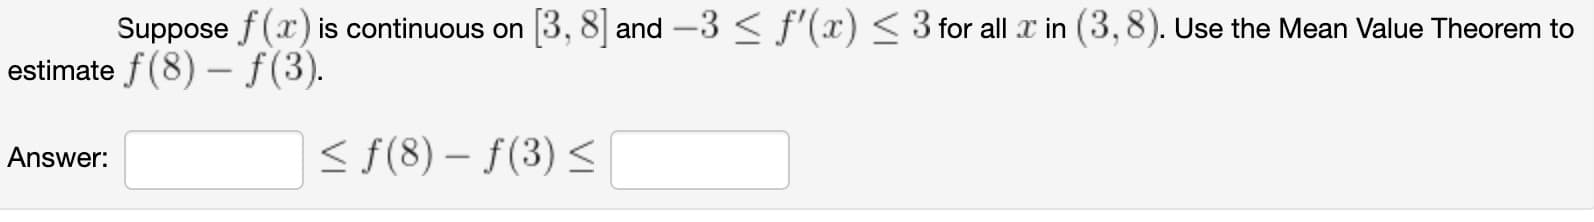 Suppose f (x) is continuous on
3, 8 and -3 < f'(x) < 3 for all x in (3,8). Use the Mean Value Theorem to
estimate f(8) – f(3).
< f(8) – f(3) <
Answer:
